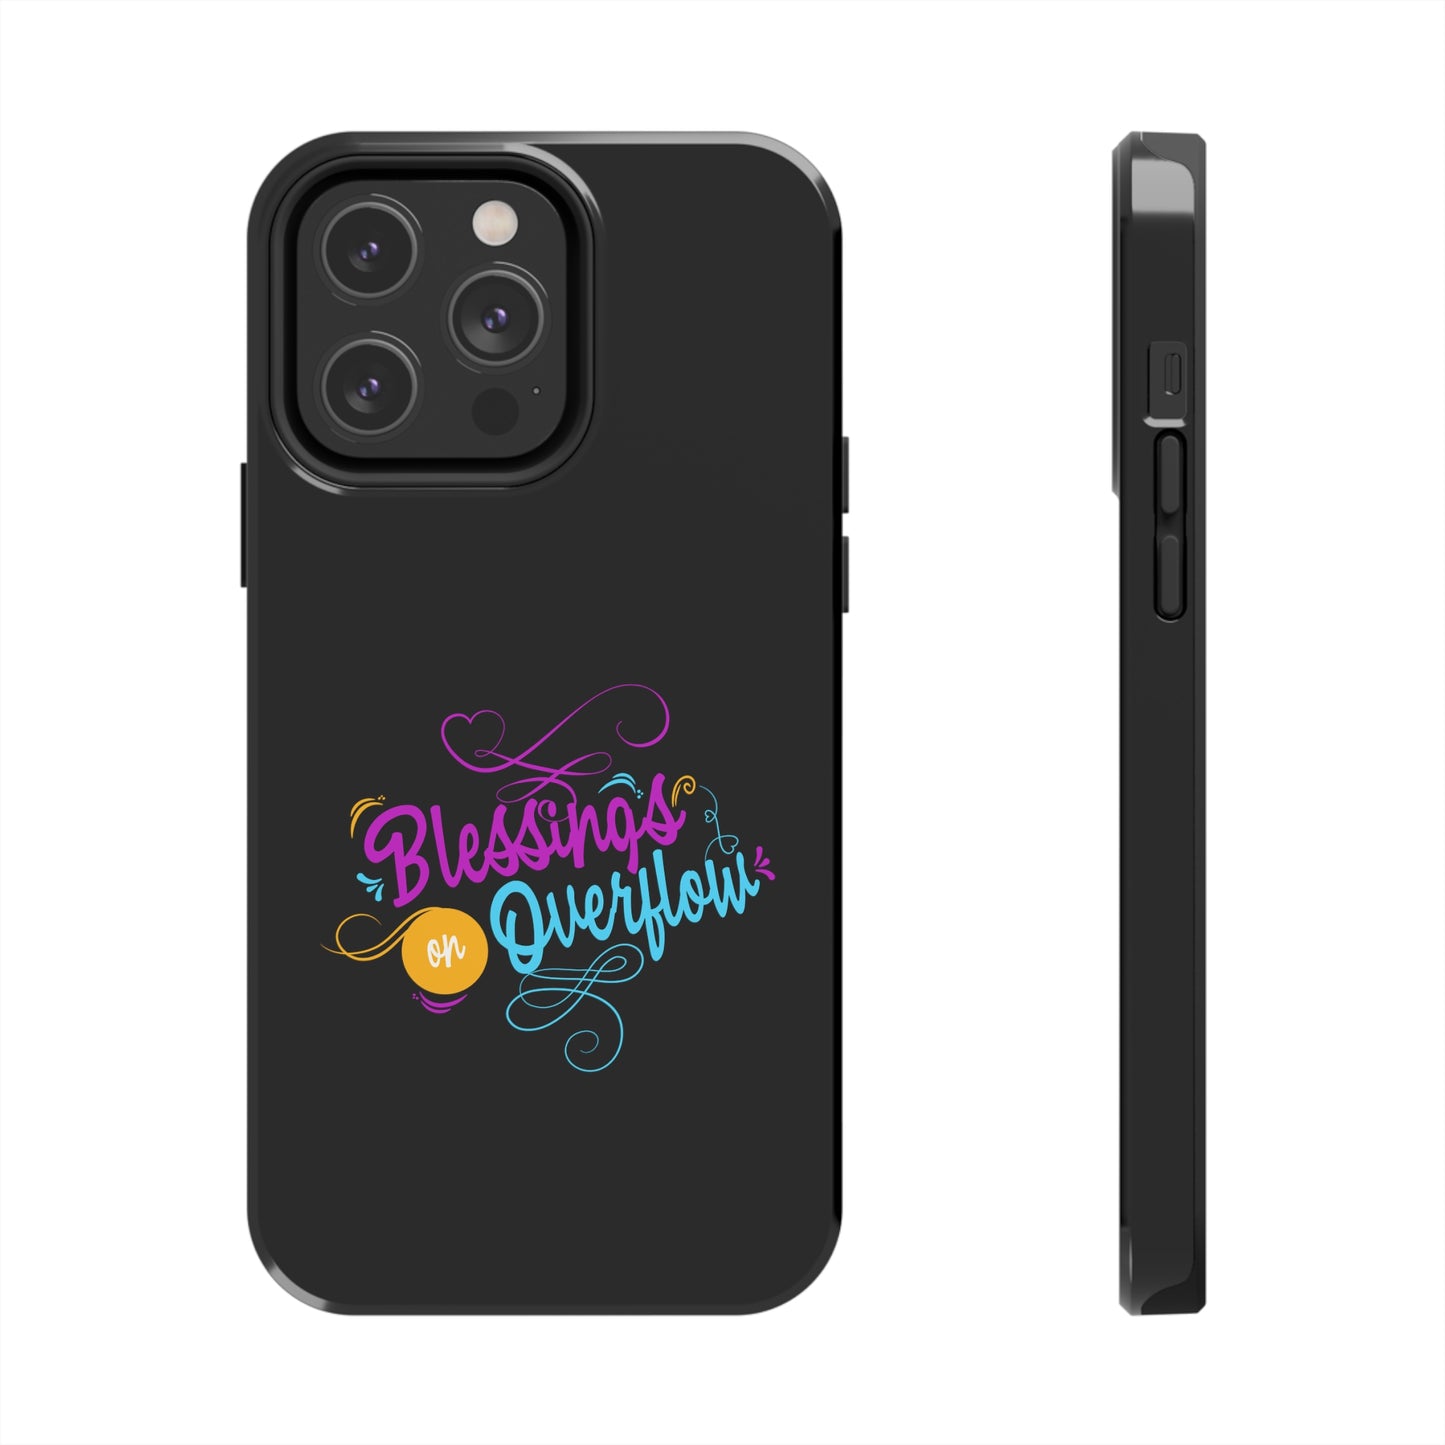 Blessings On Overflow Tough Phone Cases, Case-Mate